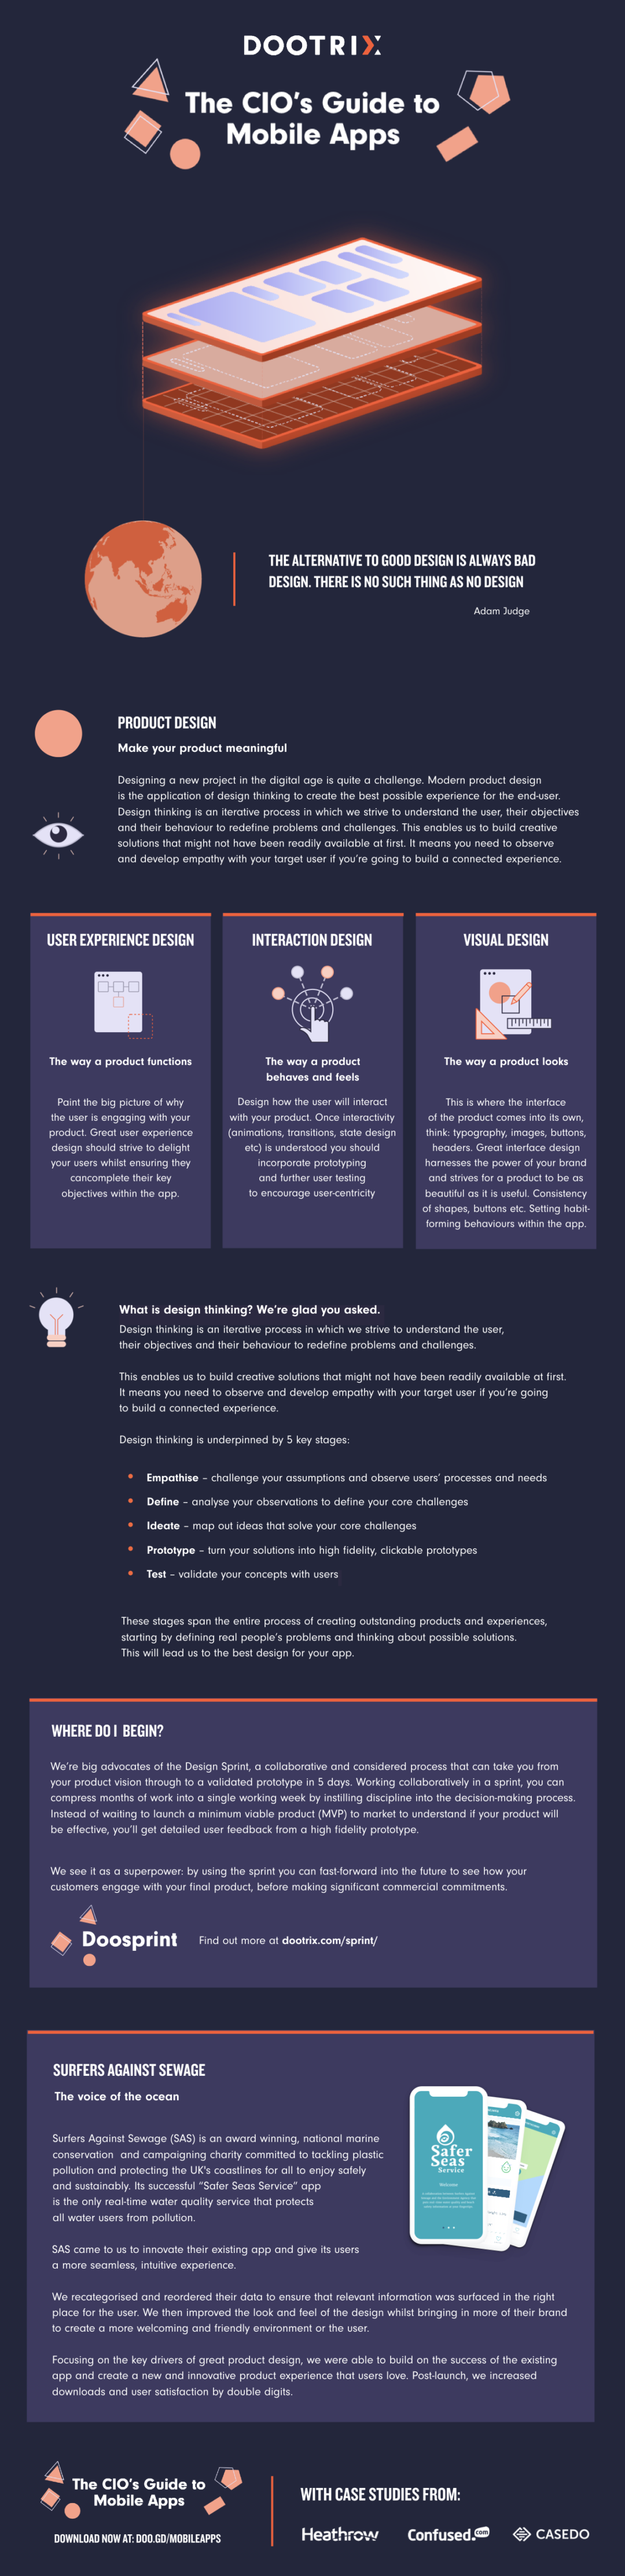 Infographic: How to deliver brilliant product design